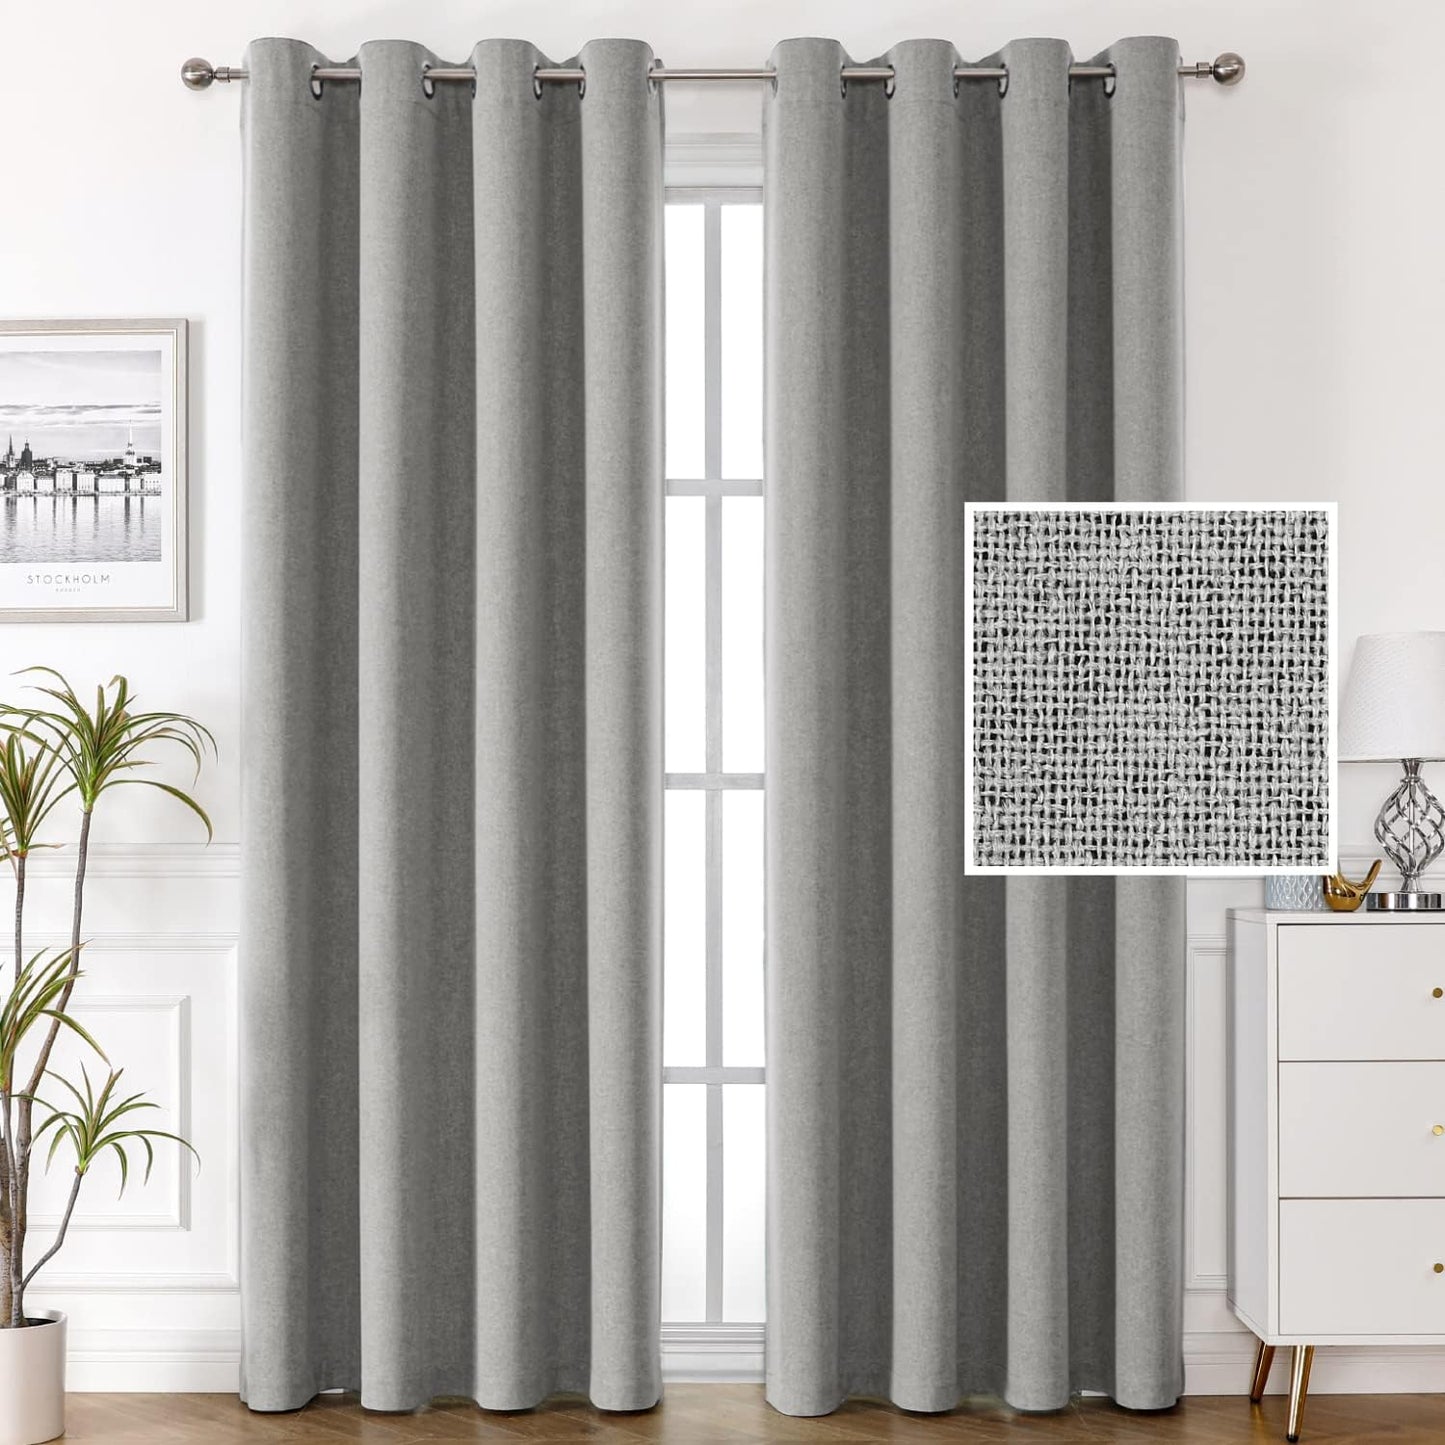 H.VERSAILTEX 100% Blackout Linen Look Curtains Thermal Insulated Curtains for Living Room Textured Burlap Drapes for Bedroom Grommet Linen Noise Blocking Curtains 42 X 84 Inch, 2 Panels - Sage  H.VERSAILTEX Grey 52"W X 96"L 